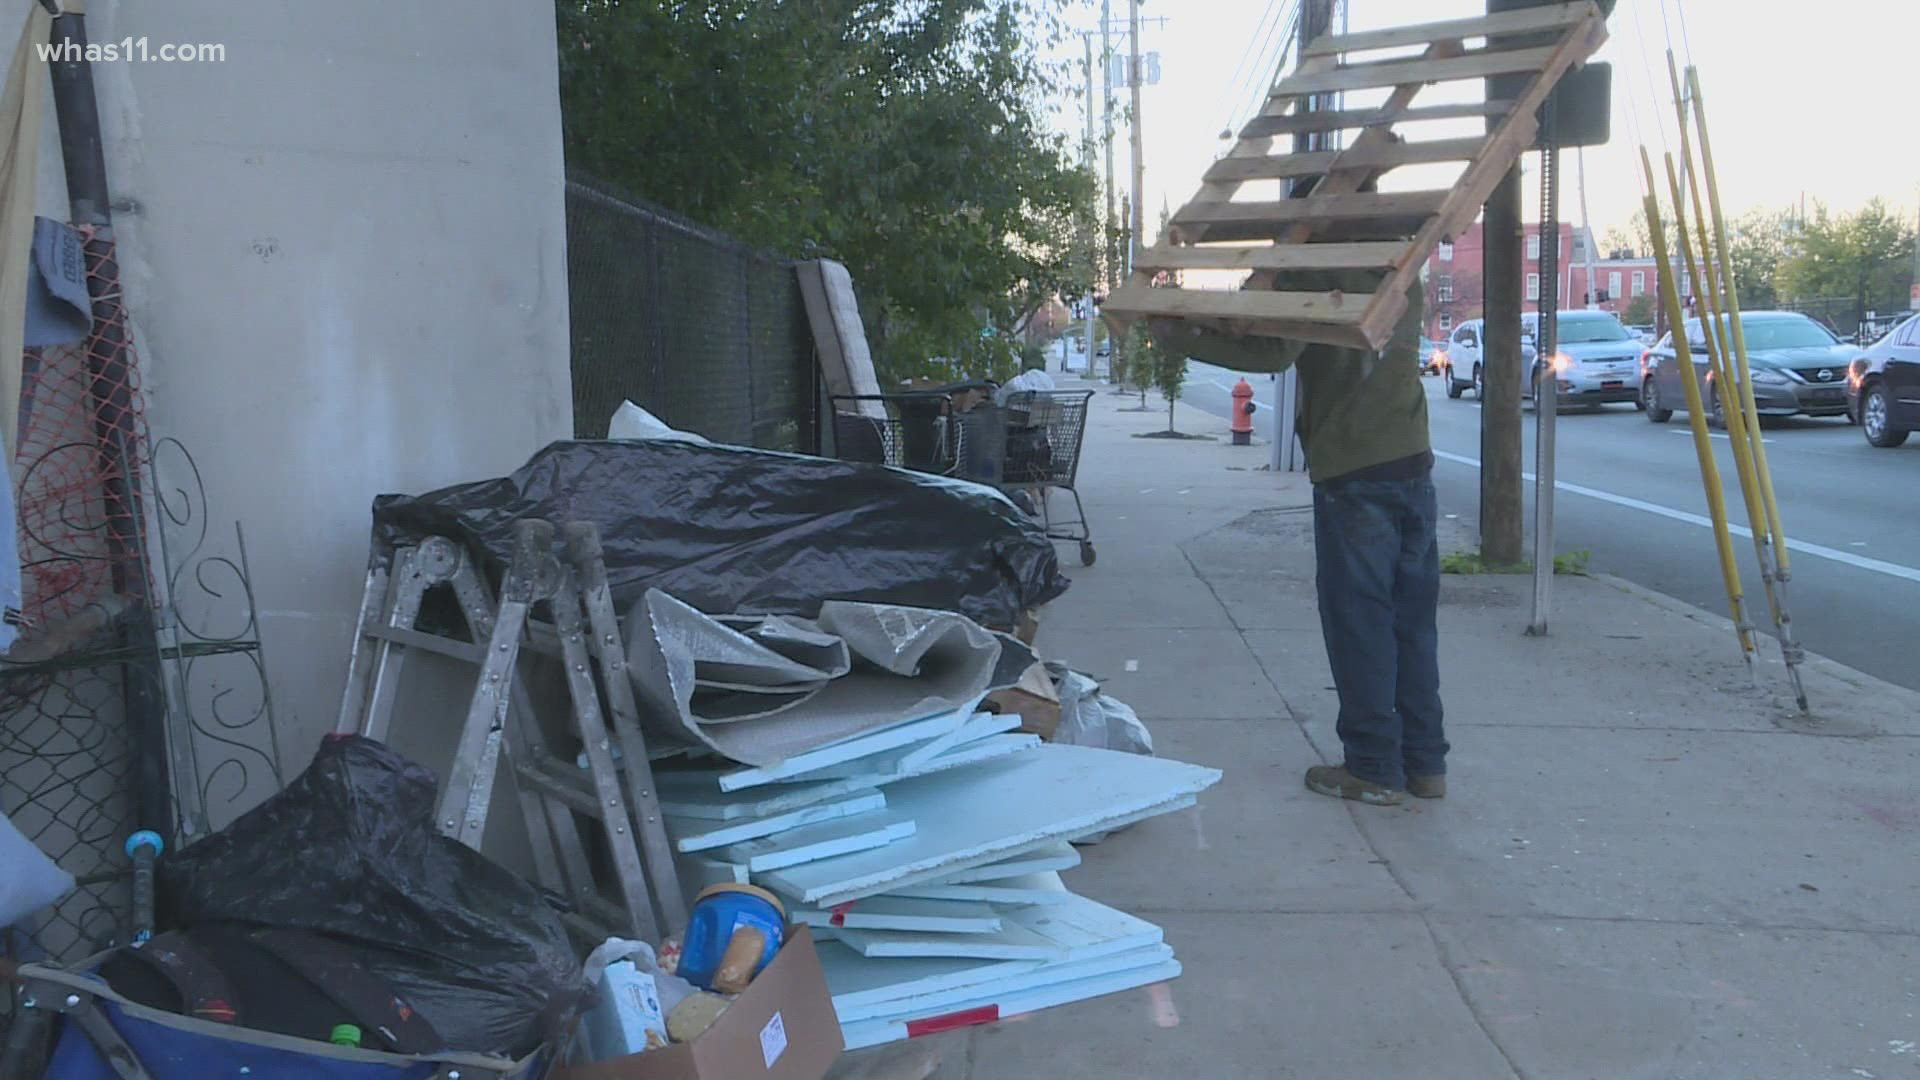 Ray was one of a handful of people who had to gather their belongings and leave as the city cleared out a homeless encampment at 9th and Market.